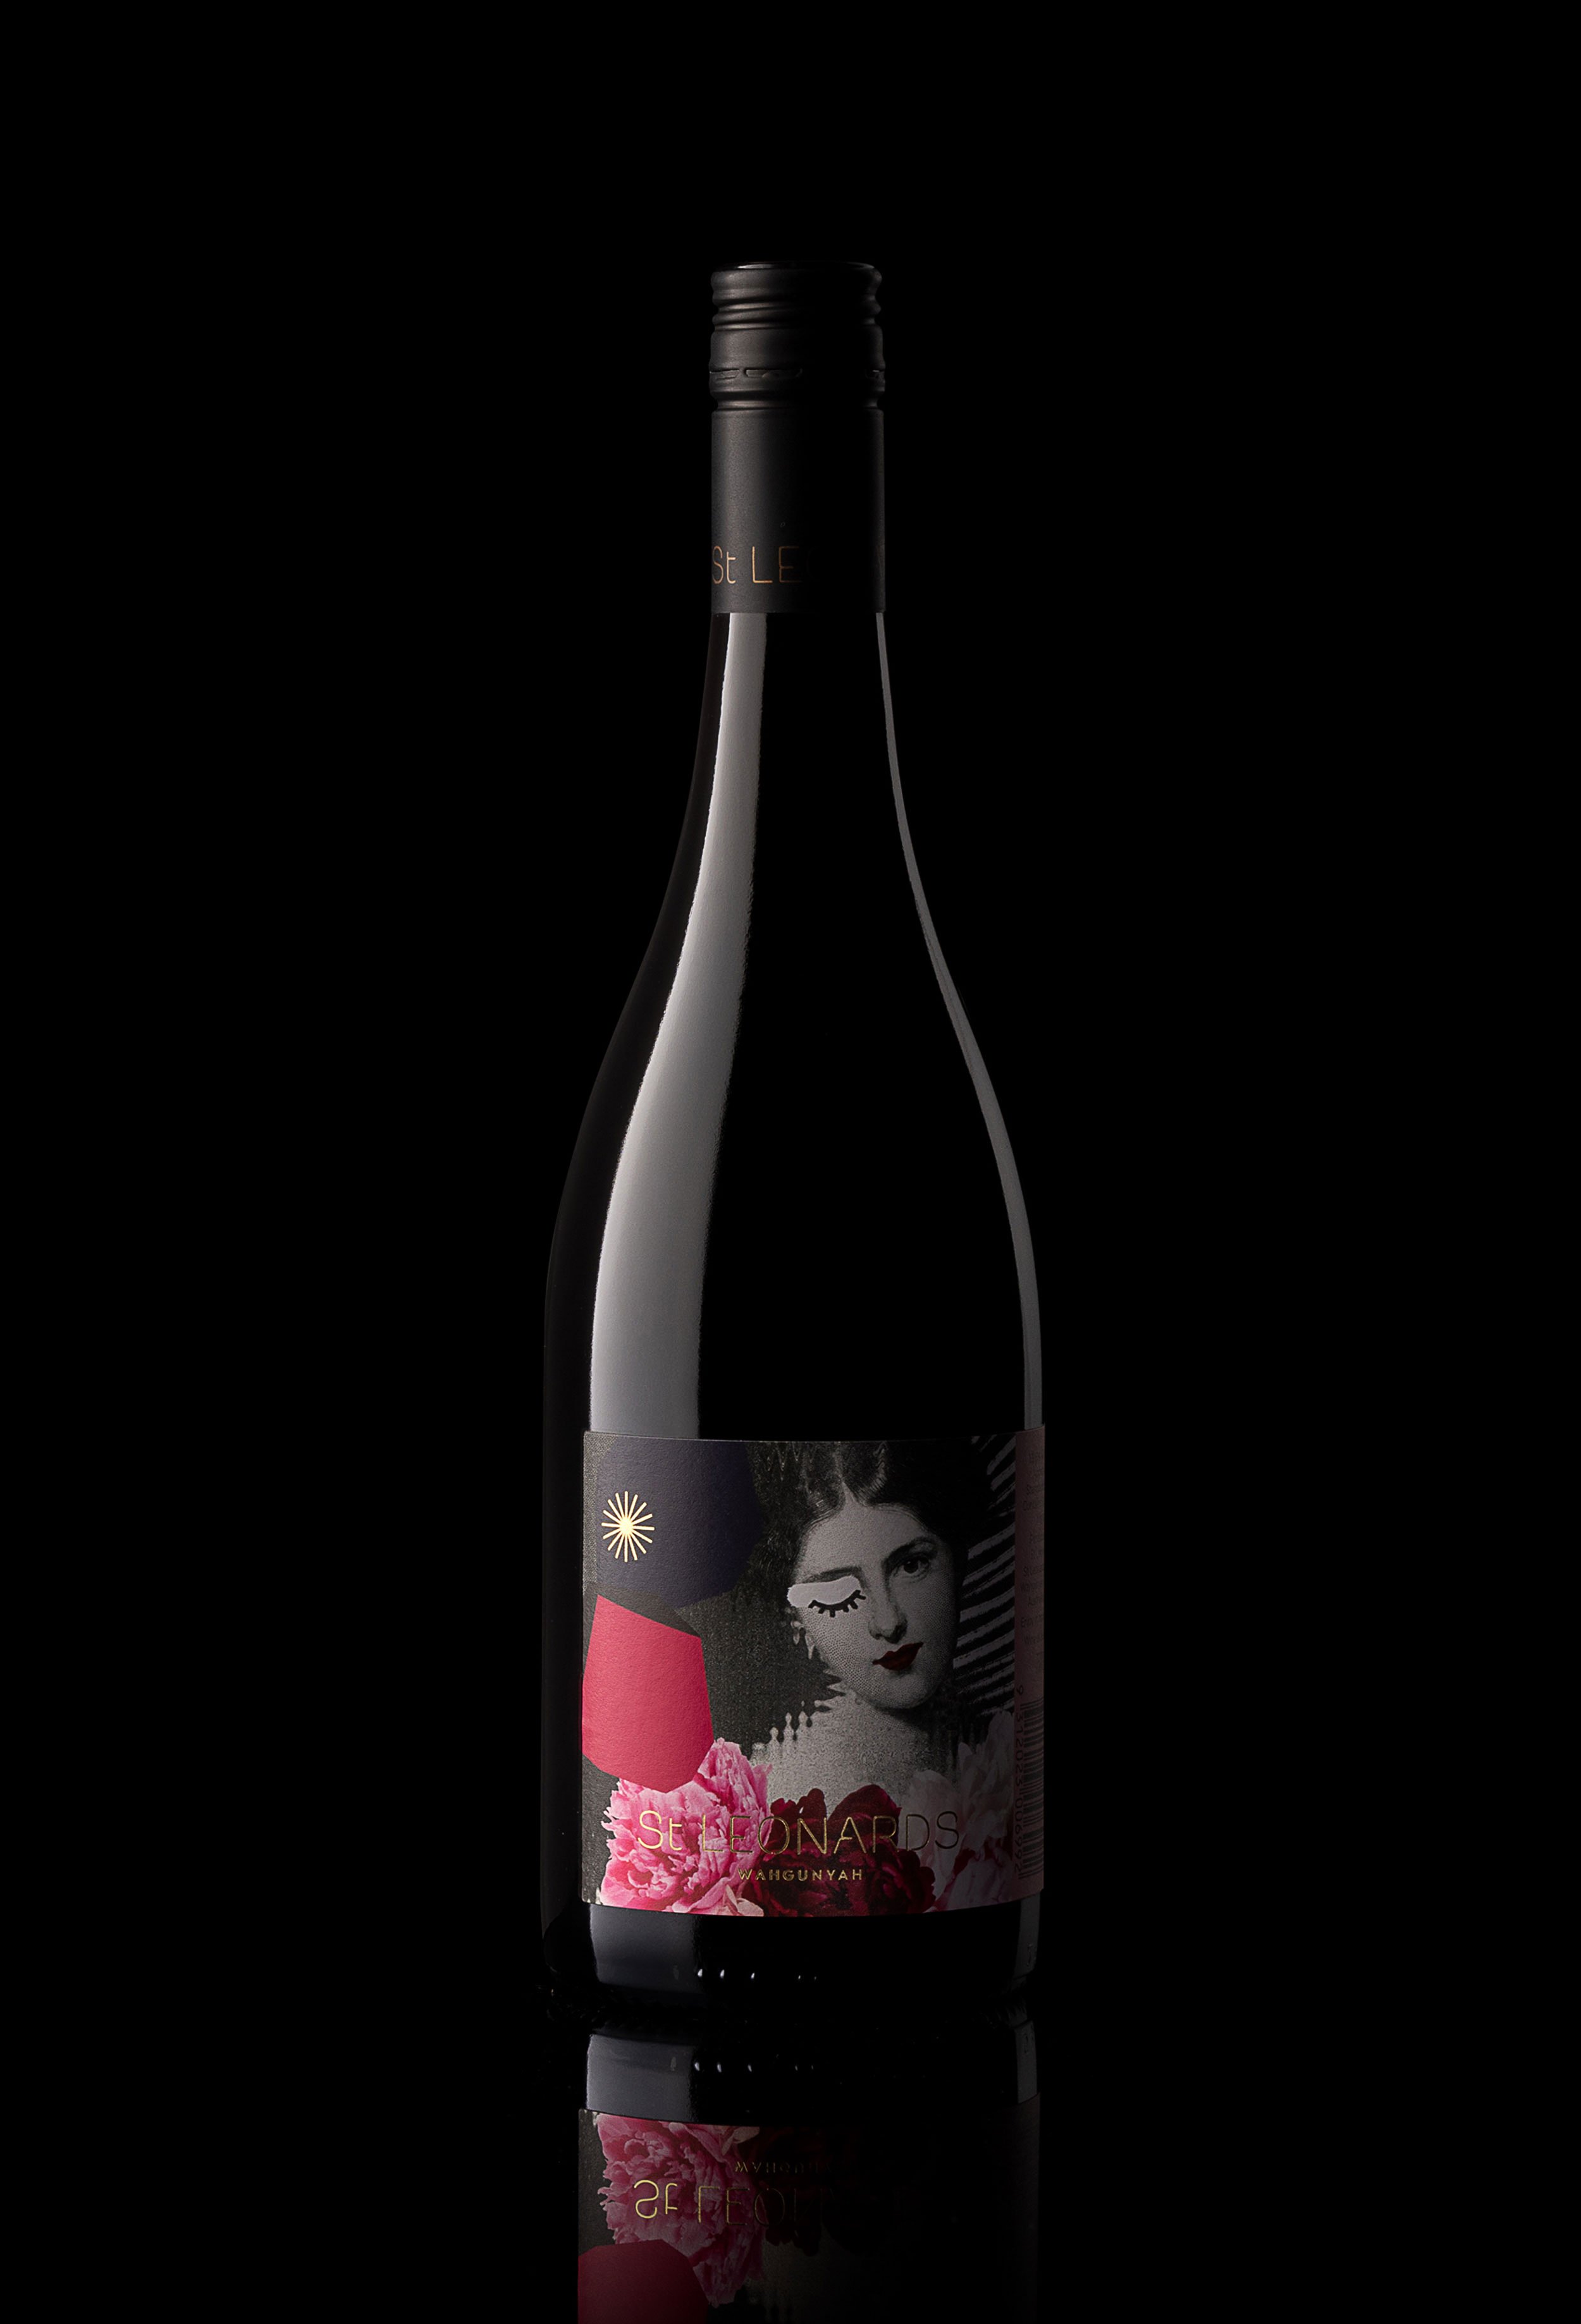 photograph taken by sarah anderson for Cloudy Co of St Leonards Vineyard wine bottle with pink label.jpg